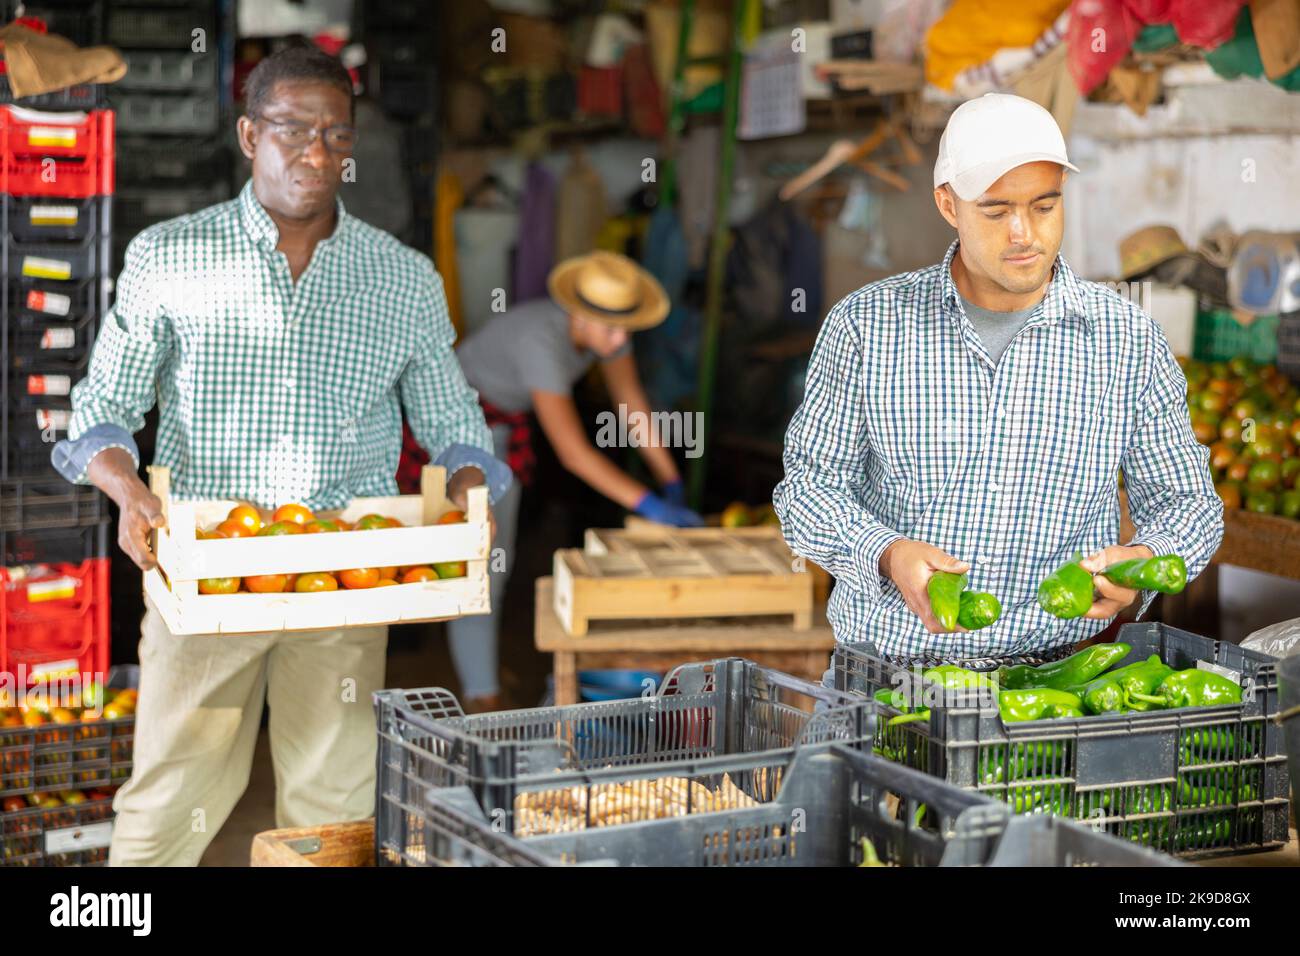 Farm worker sorting freshly picked peppers and packing into boxes Stock Photo